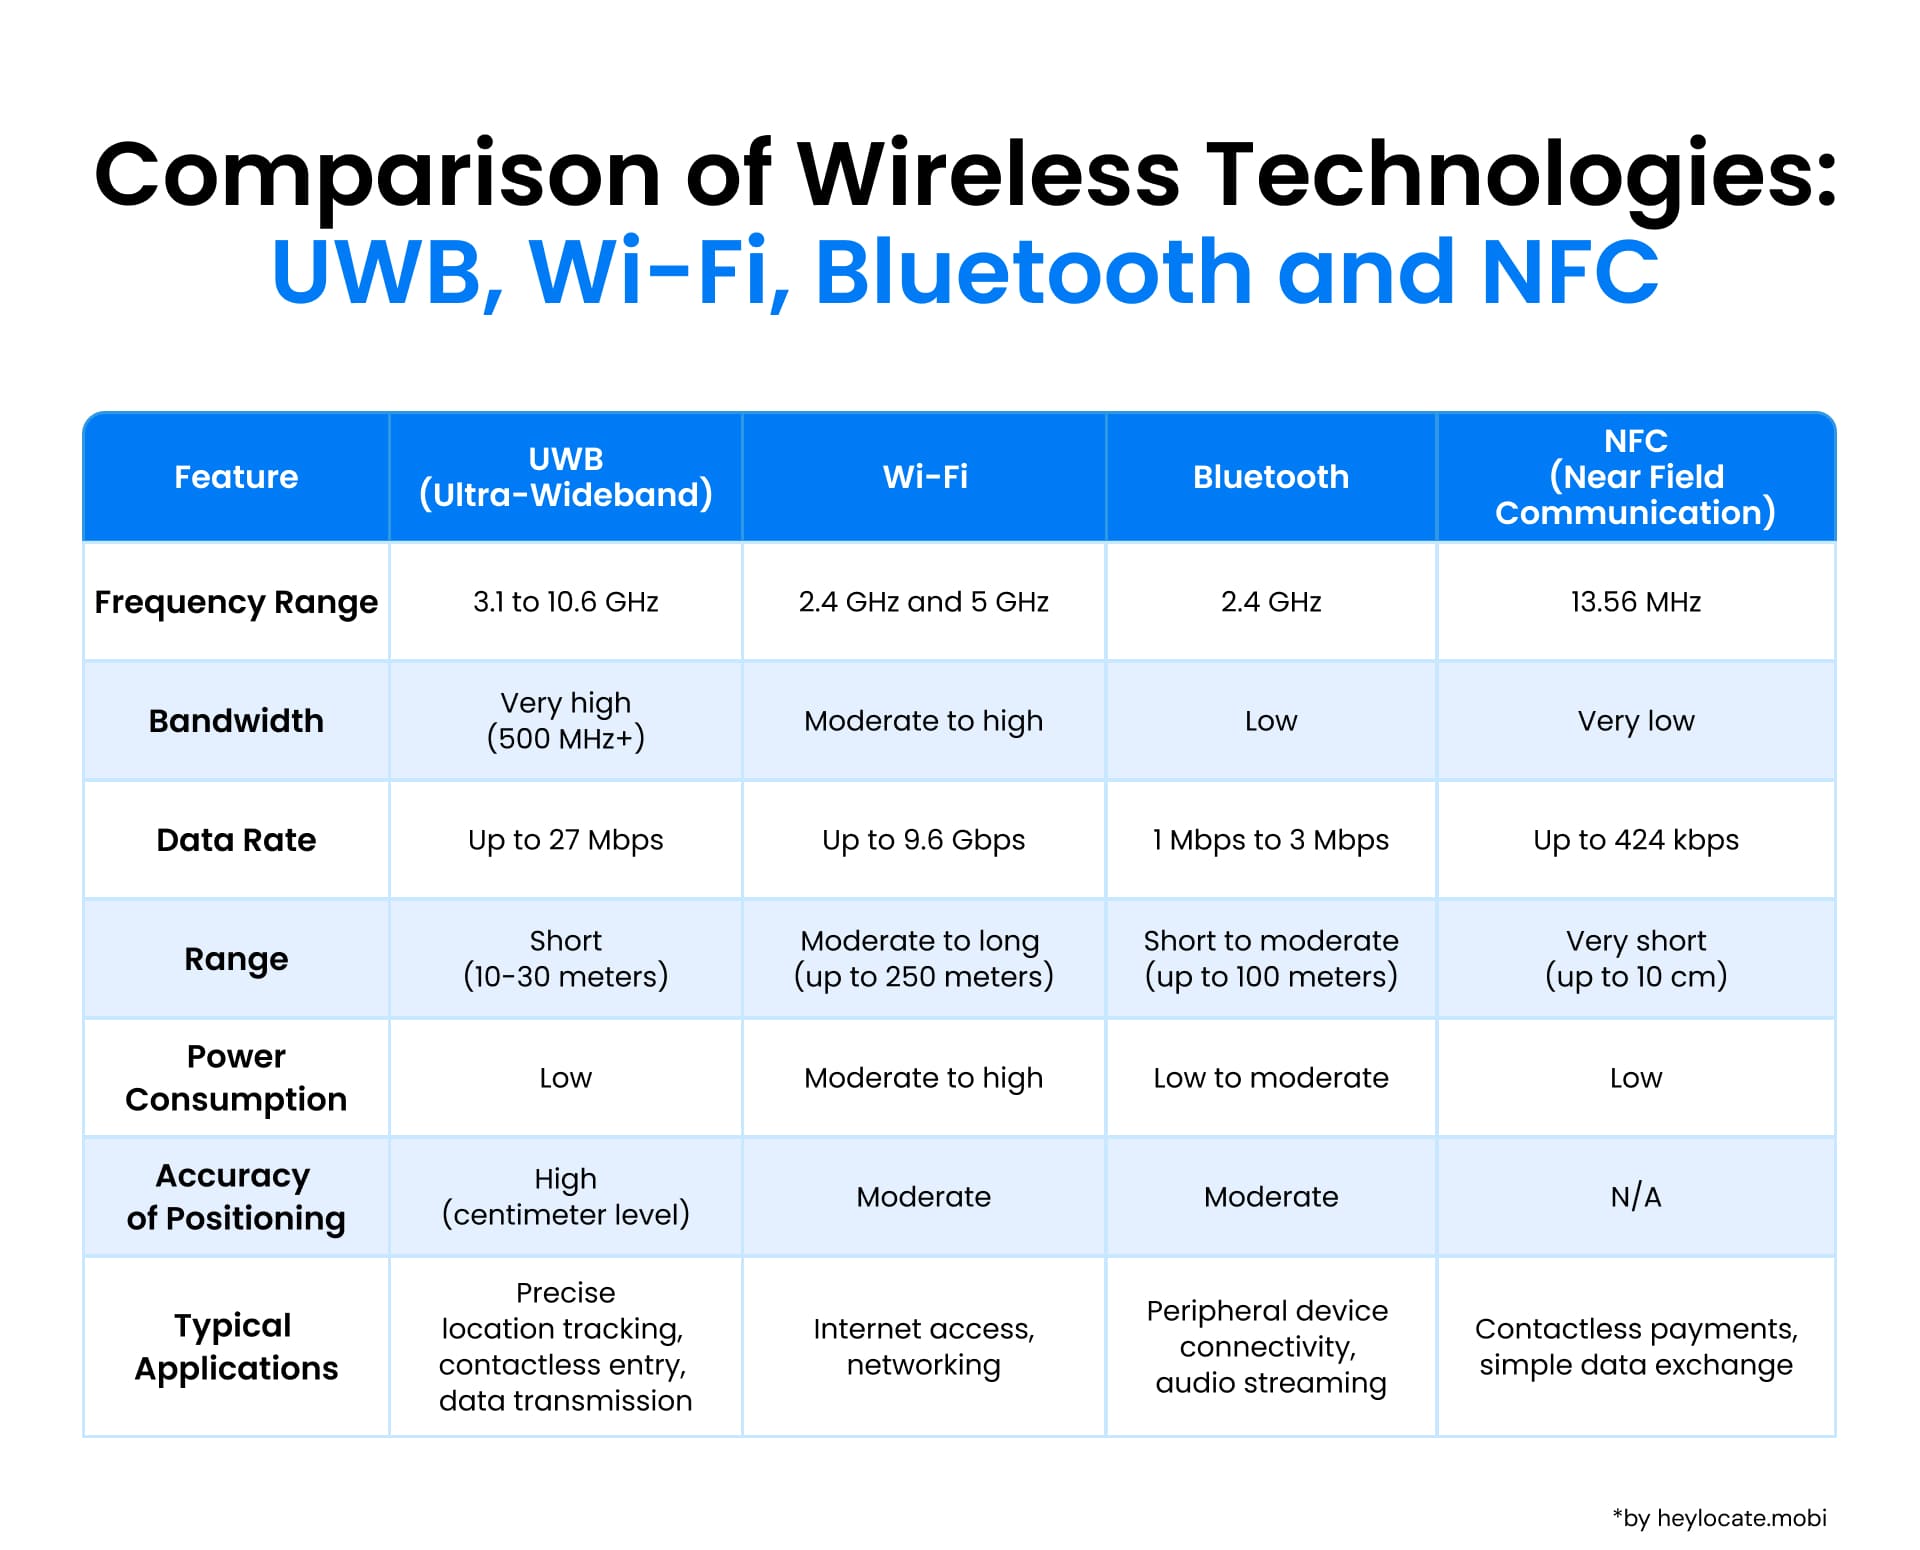 Comparative table of the UWB, Wi-Fi, Bluetooth, and NFC technologies by frequency, bandwidth, data rate, range, power consumption, positioning accuracy, and applications